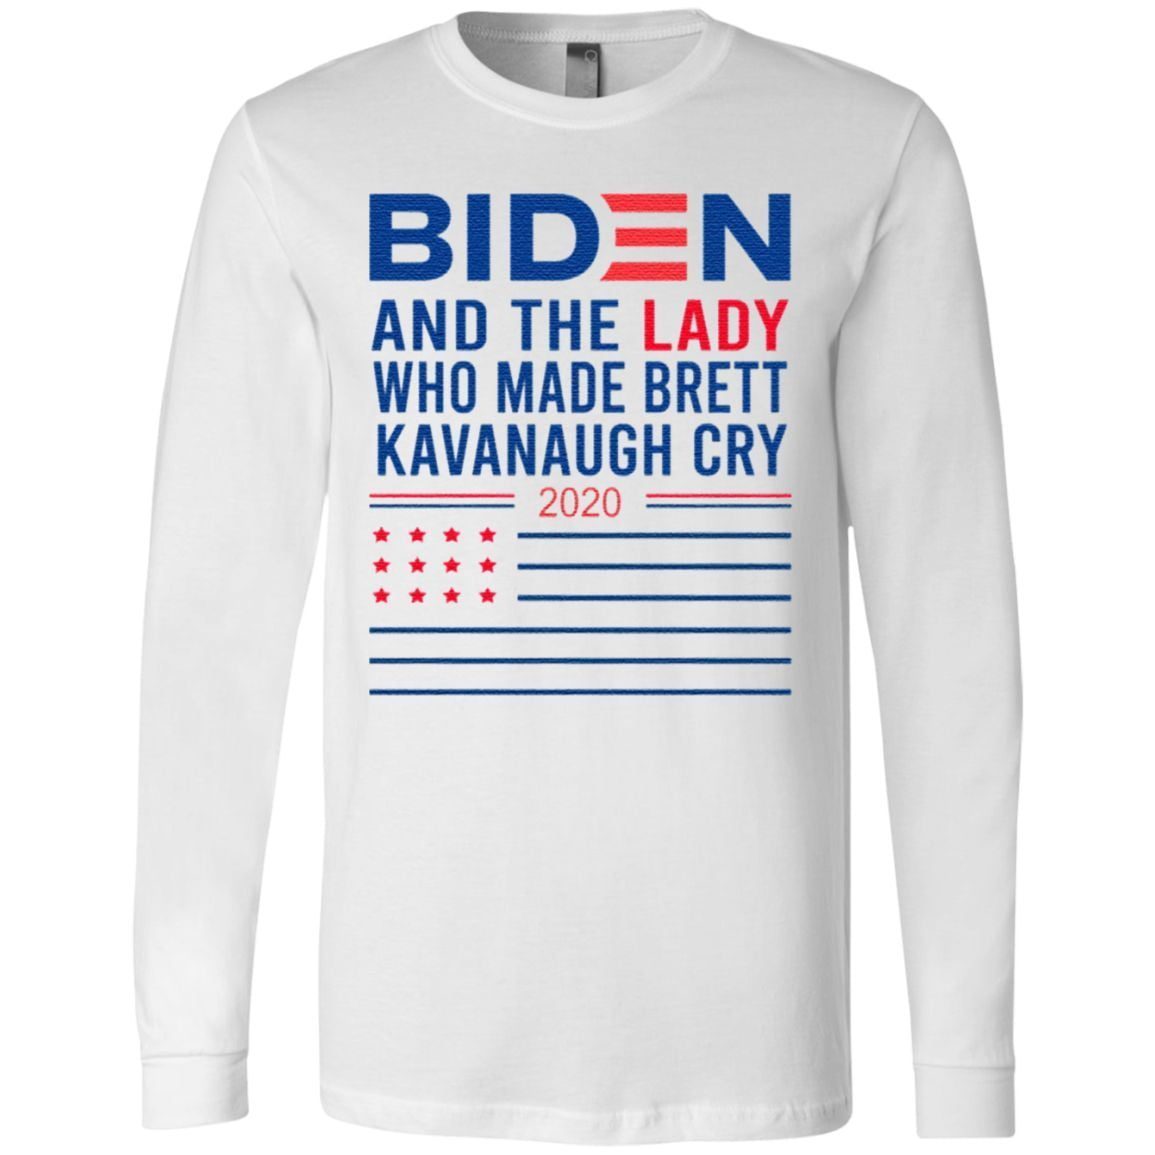 Biden And The Lady Who Made Brett Kavanaugh Cry 2020 T Shirt